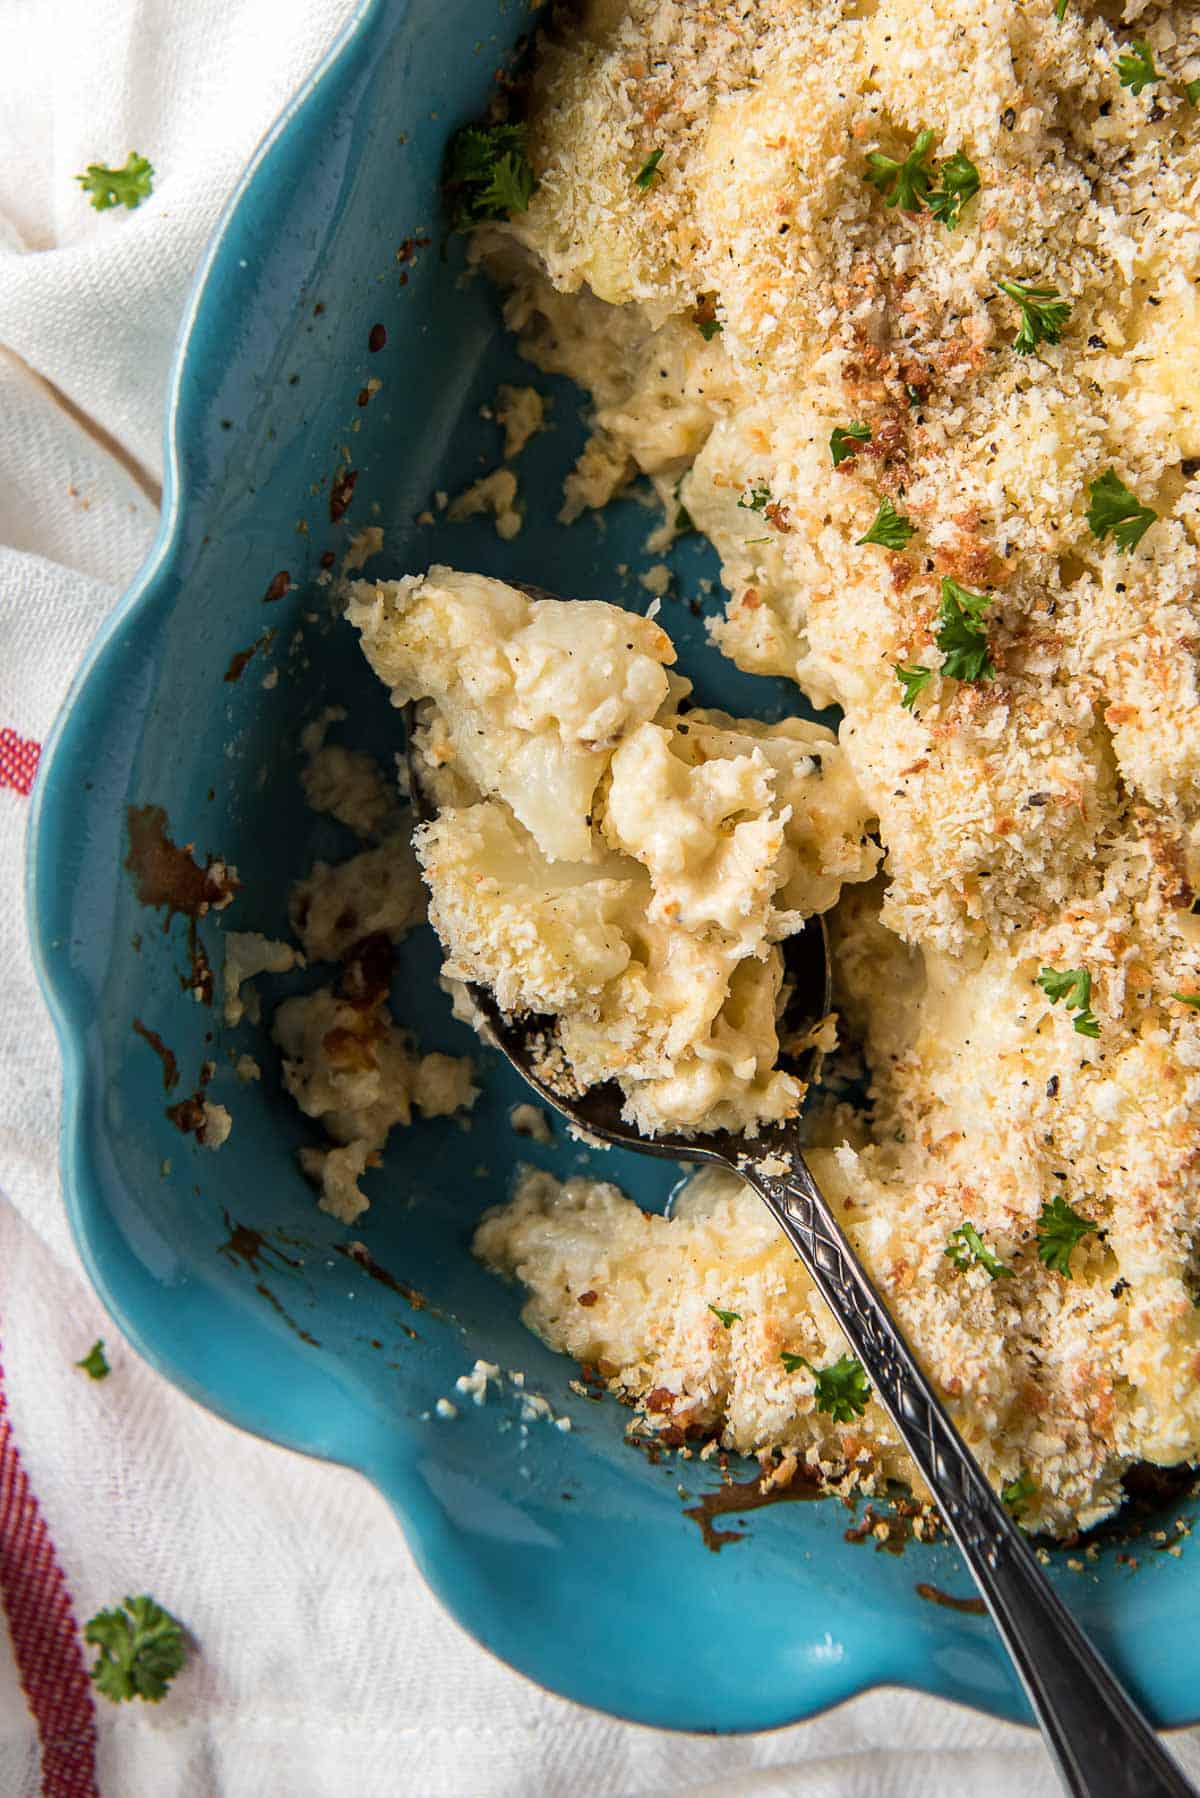 A spoon with a scoop of cauliflower gratin in a blue casserole dish.